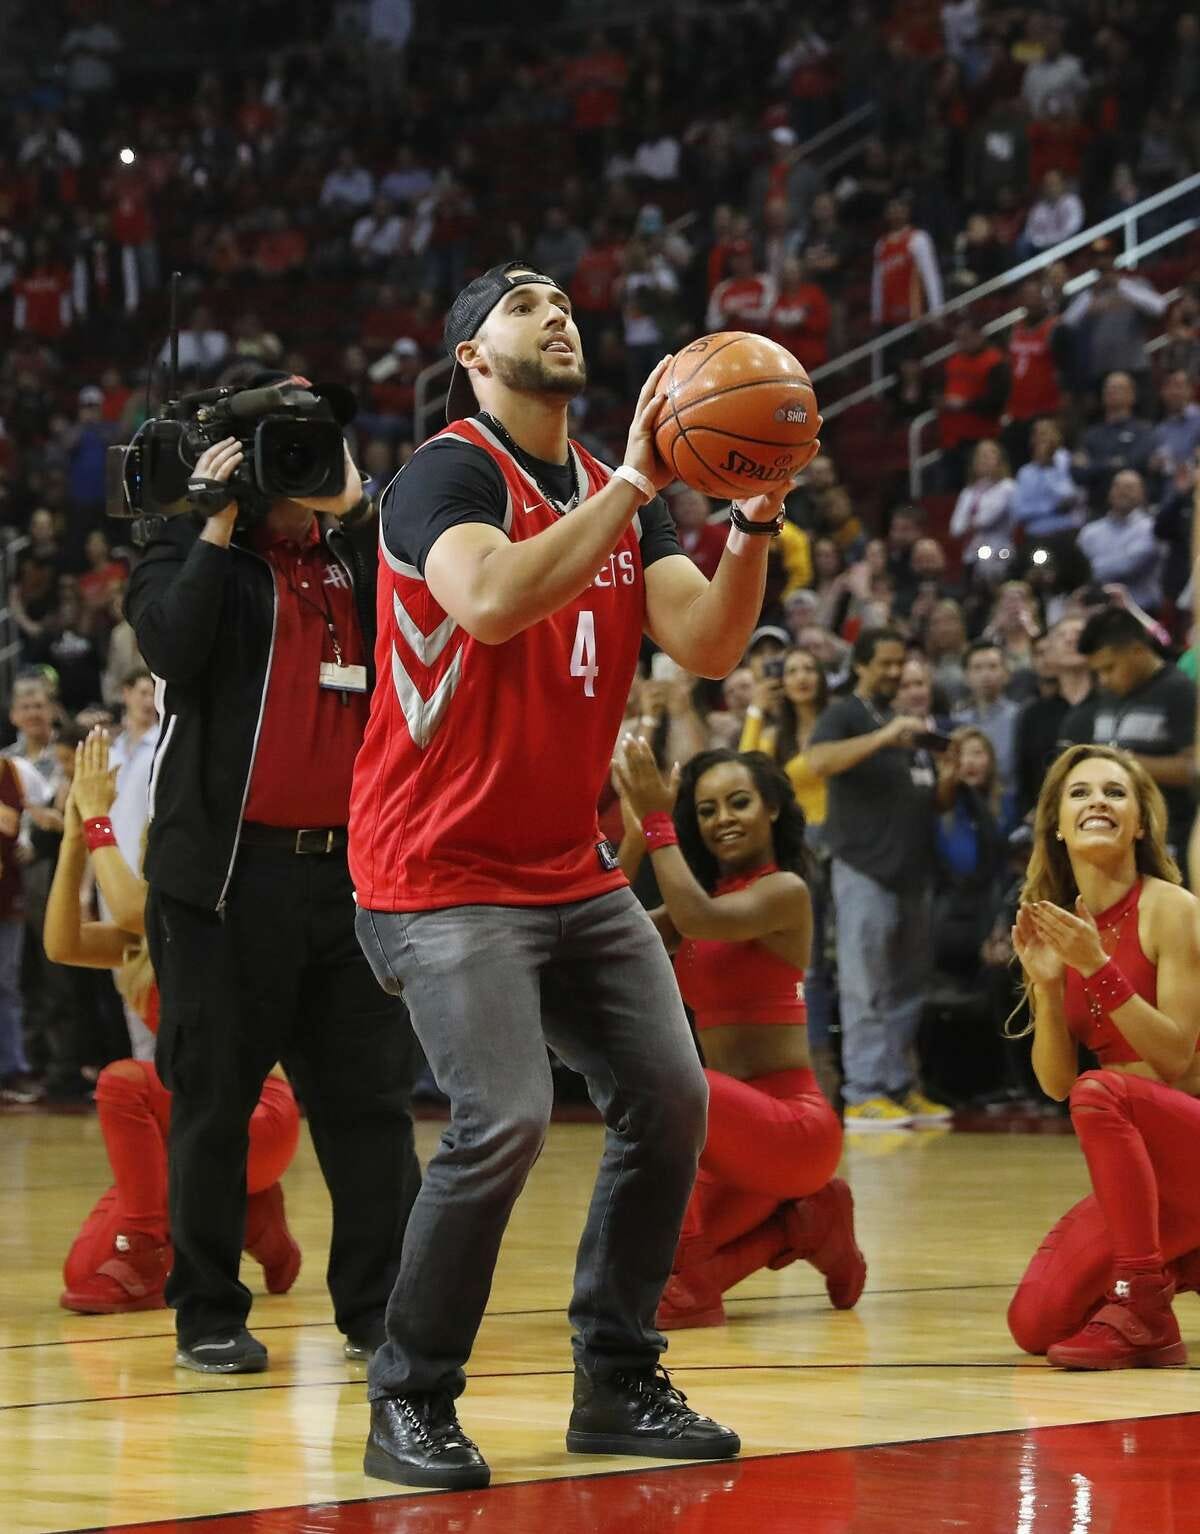 HOUSTON, TX - NOVEMBER 09: George Springer #4 of the Houston Astros shoots a free throw before the game between the Houston Rockets and the Cleveland Cavaliers at Toyota Center on November 09, 2017 in Houston, Texas. NOTE TO USER: User expressly acknowledges and agrees that, by downloading and or using this photograph, User is consenting to the terms and conditions of the Getty Images License Agreement. (Photo by Tim Warner/Getty Images)